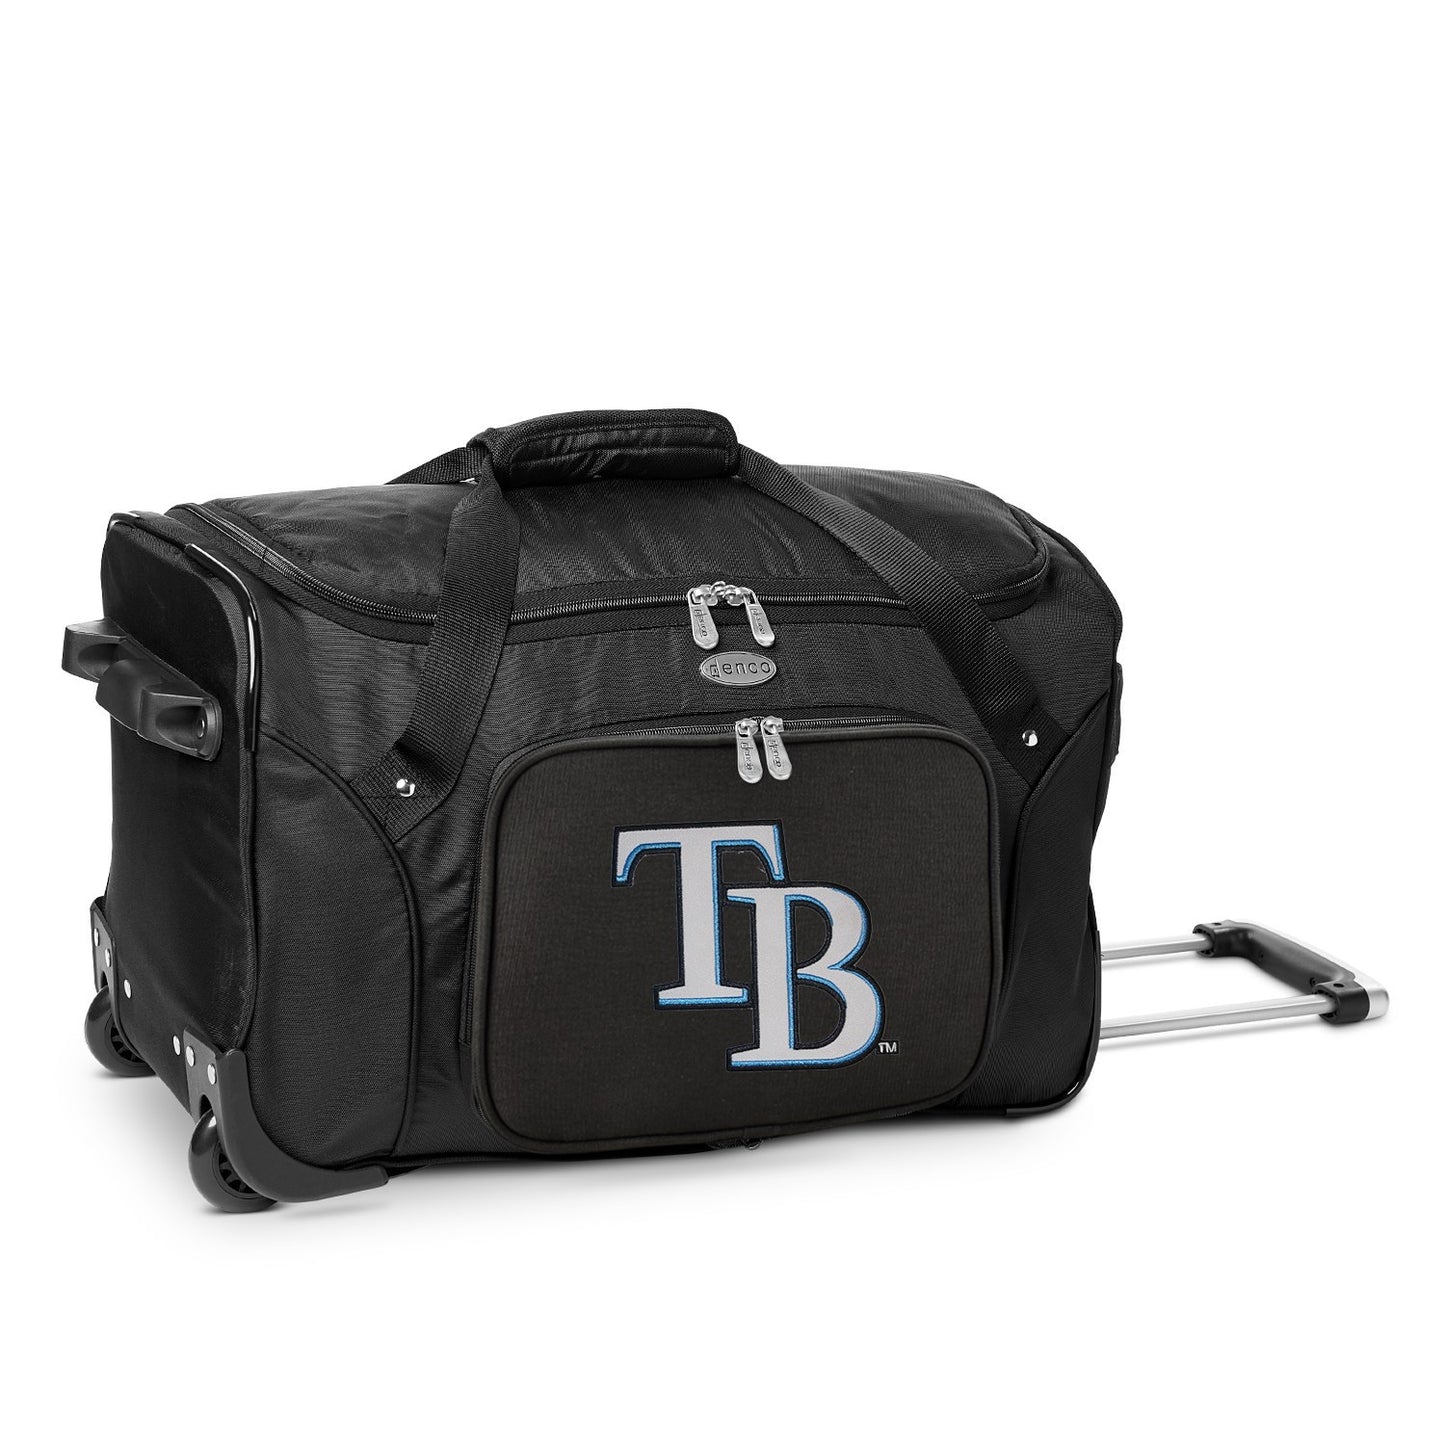 Tampa Bay Rays Luggage | Tampa Bay Rays Wheeled Carry On Luggage